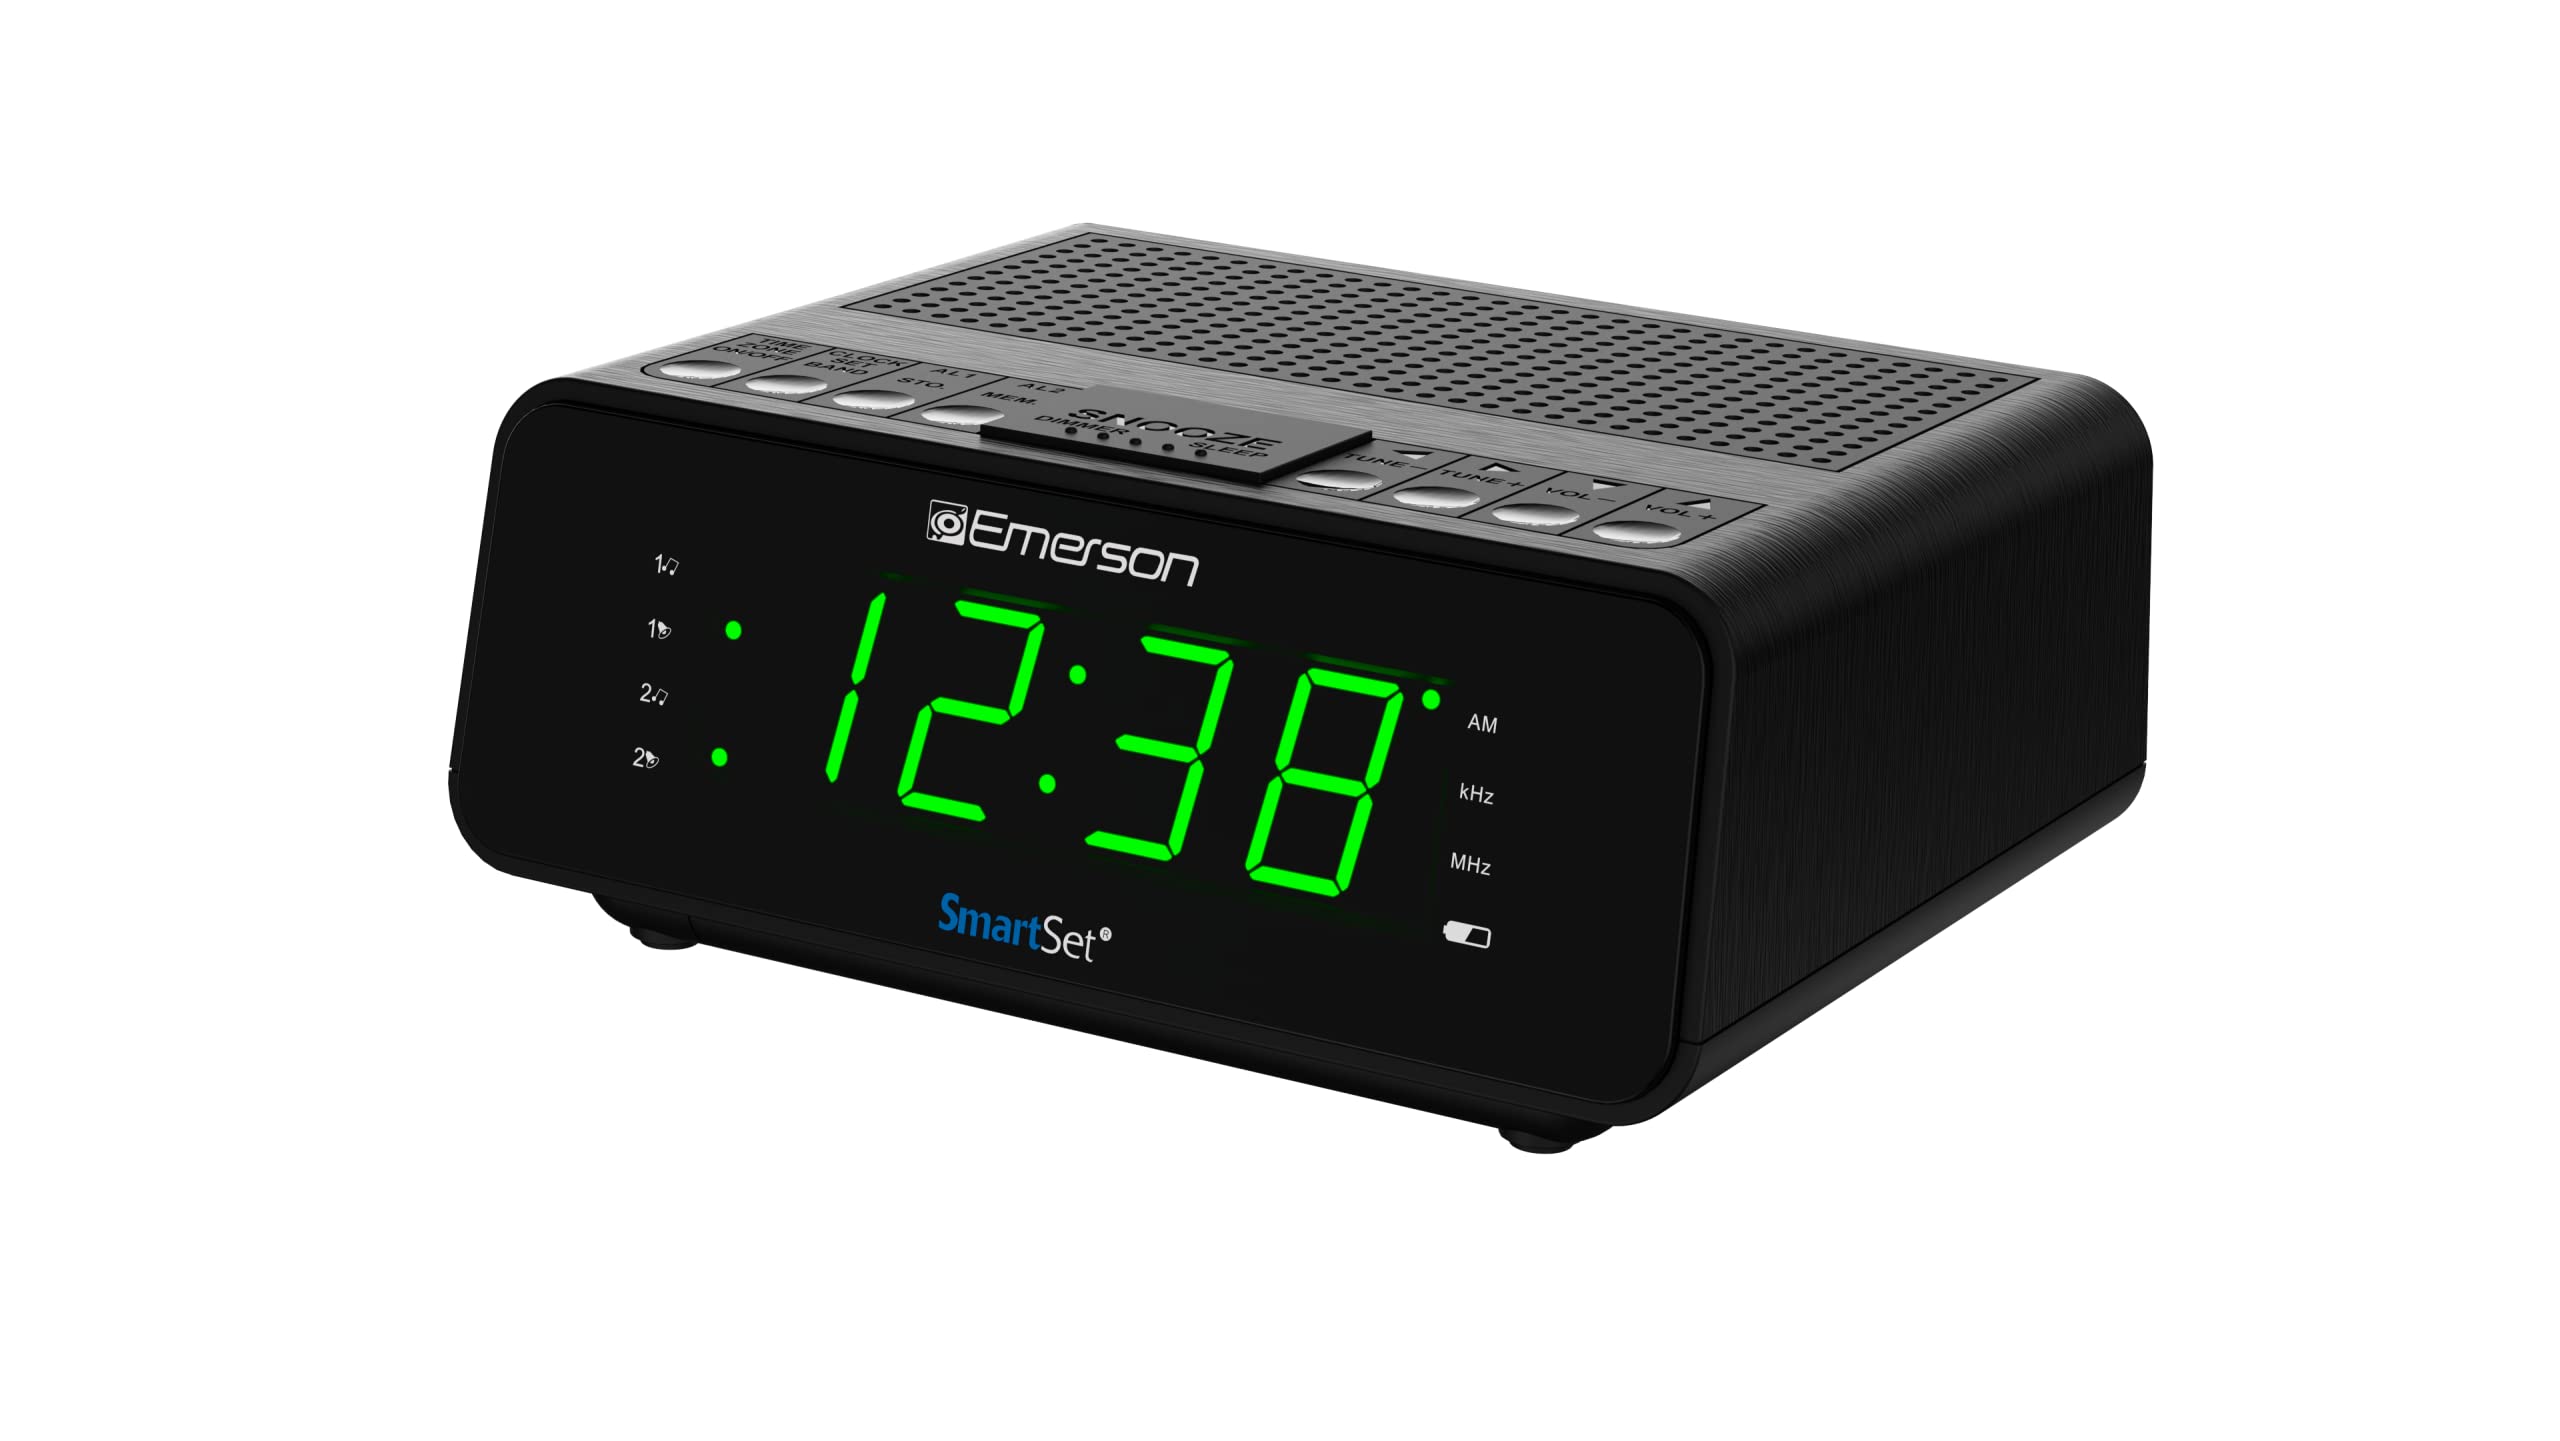 Emerson SmartSet Alarm Clock Radio with AM/FM Radio, Dimmer, Sleep Timer and LED Display for $9.99 + Free Shipping w/Prime